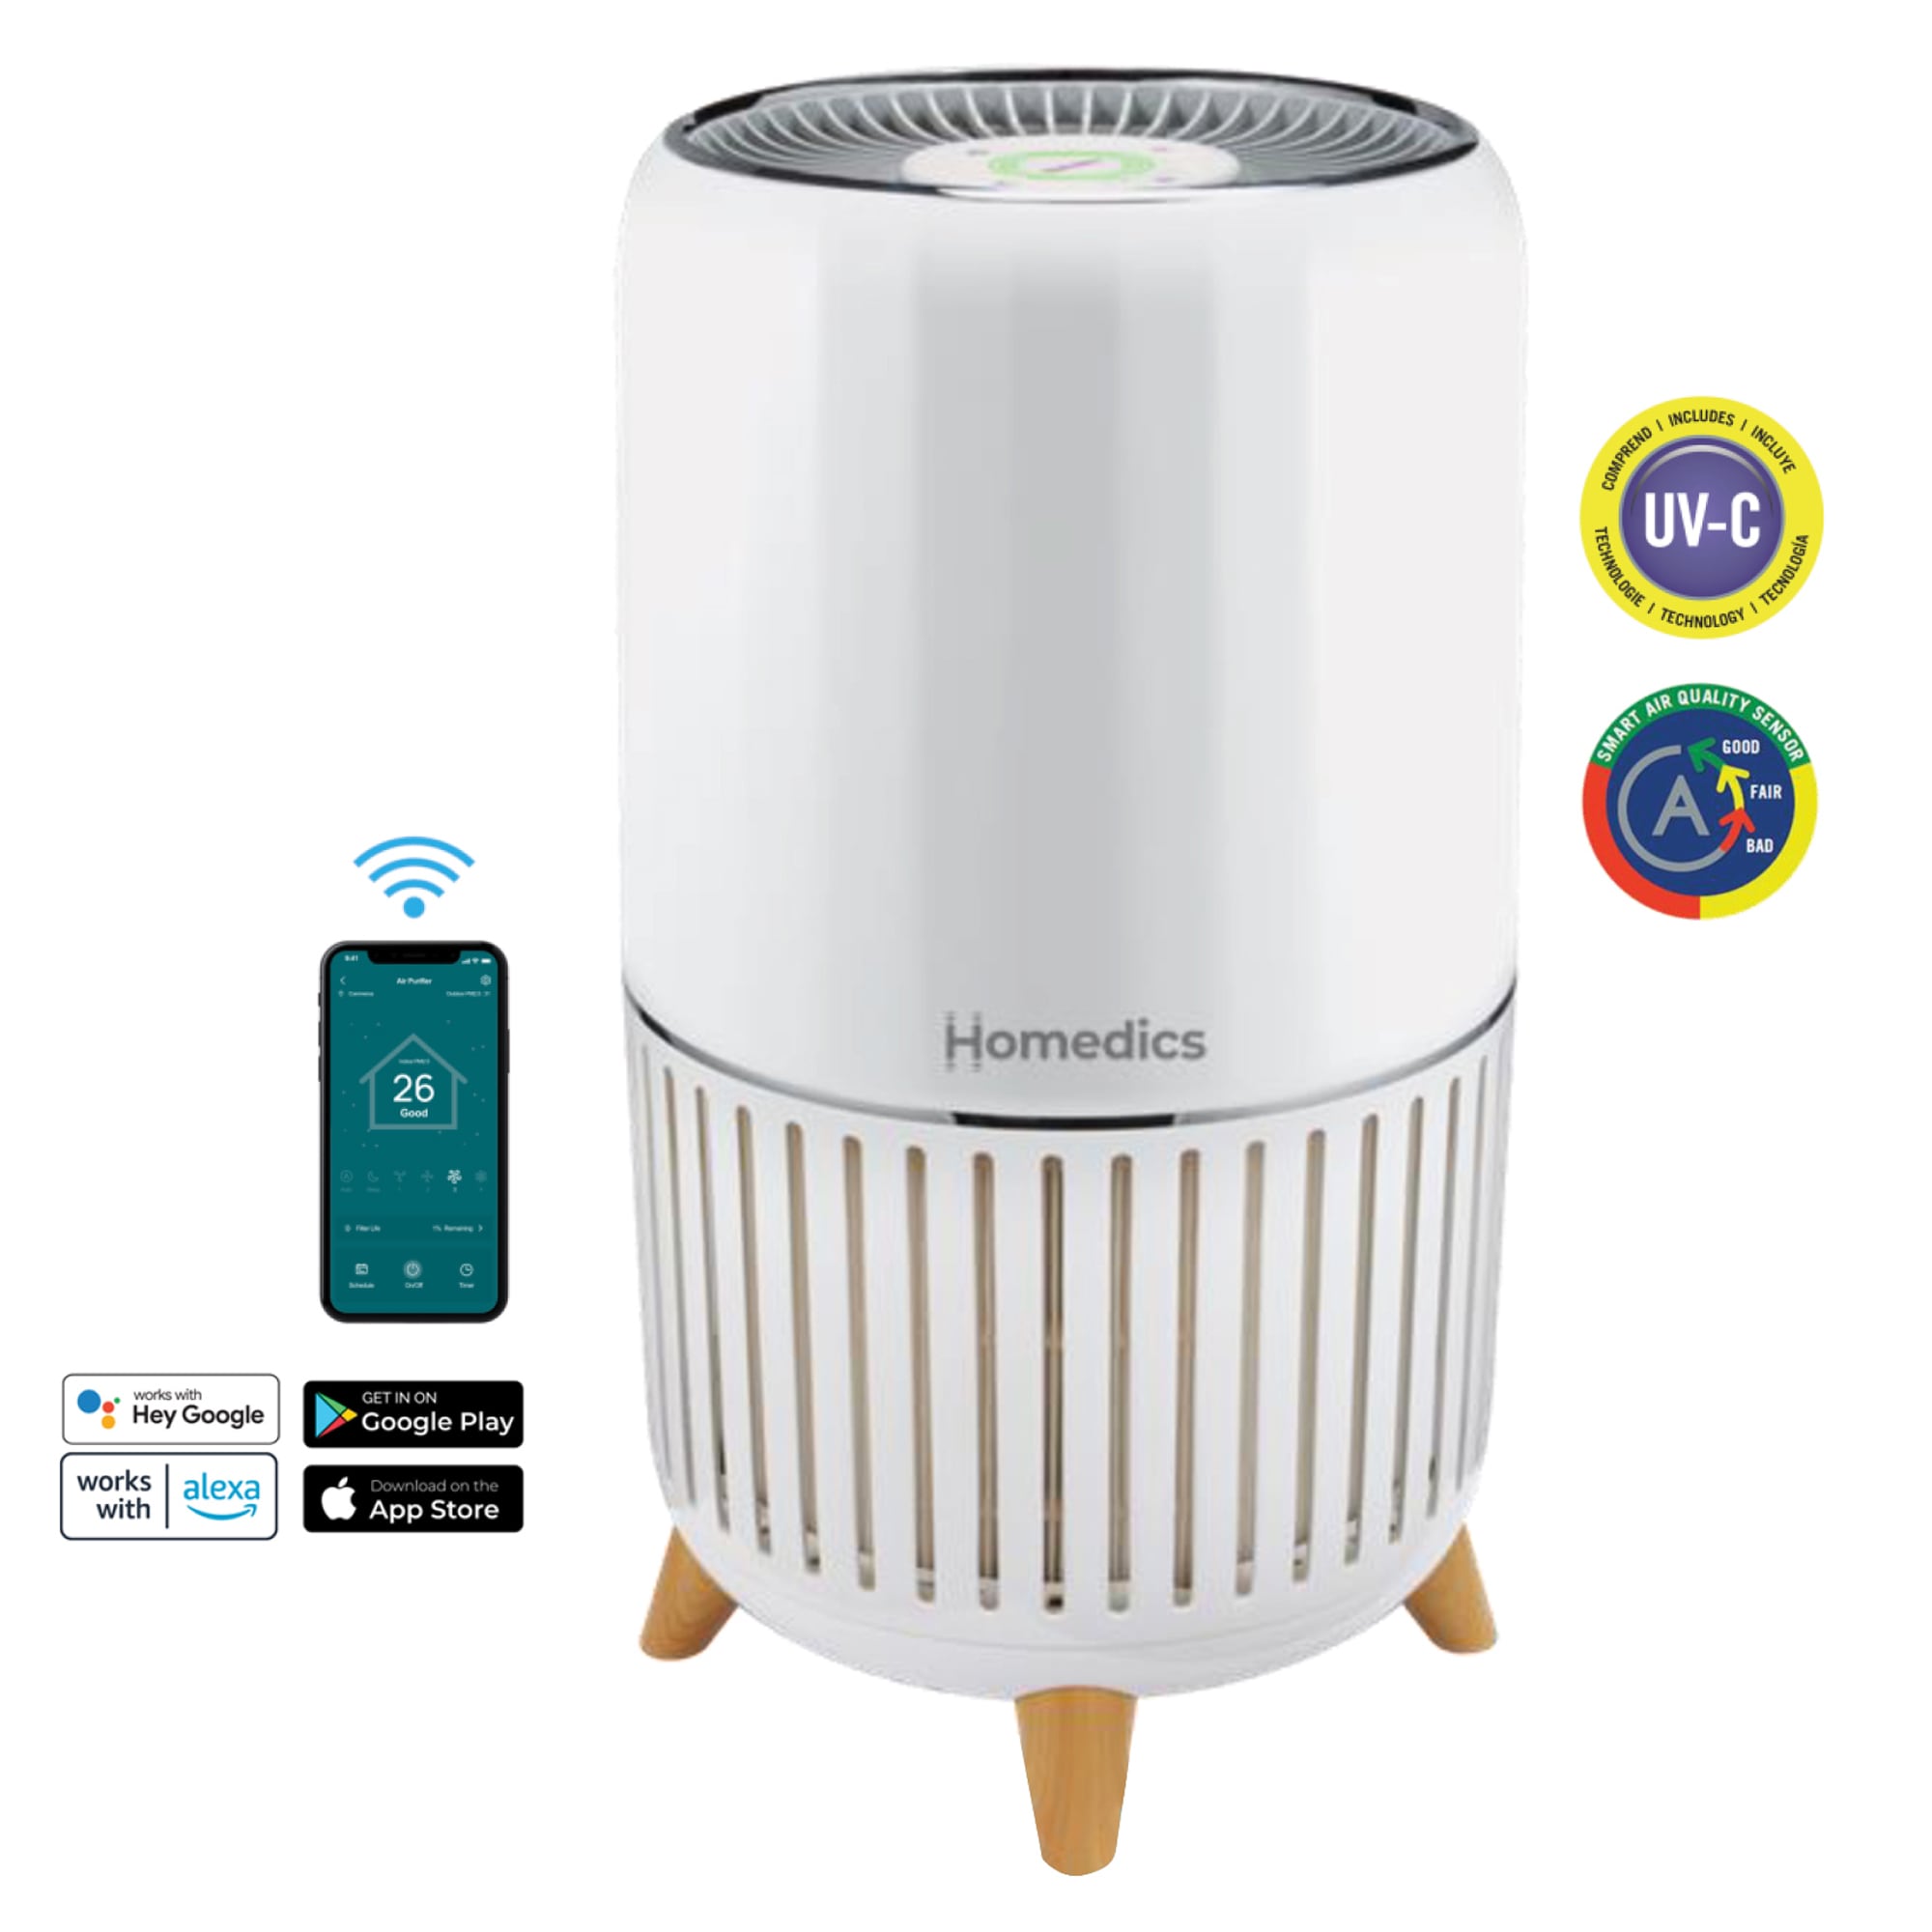  Galanz Pro Air Purifier, Smart WiFi, Auto Air Quality Monitor,  3-Stage H13 HEPA Filter for 875 sq ft Large Room, 99.99% of Particles, Pet  Allergies, Mold, Smoke, White: Home & Kitchen